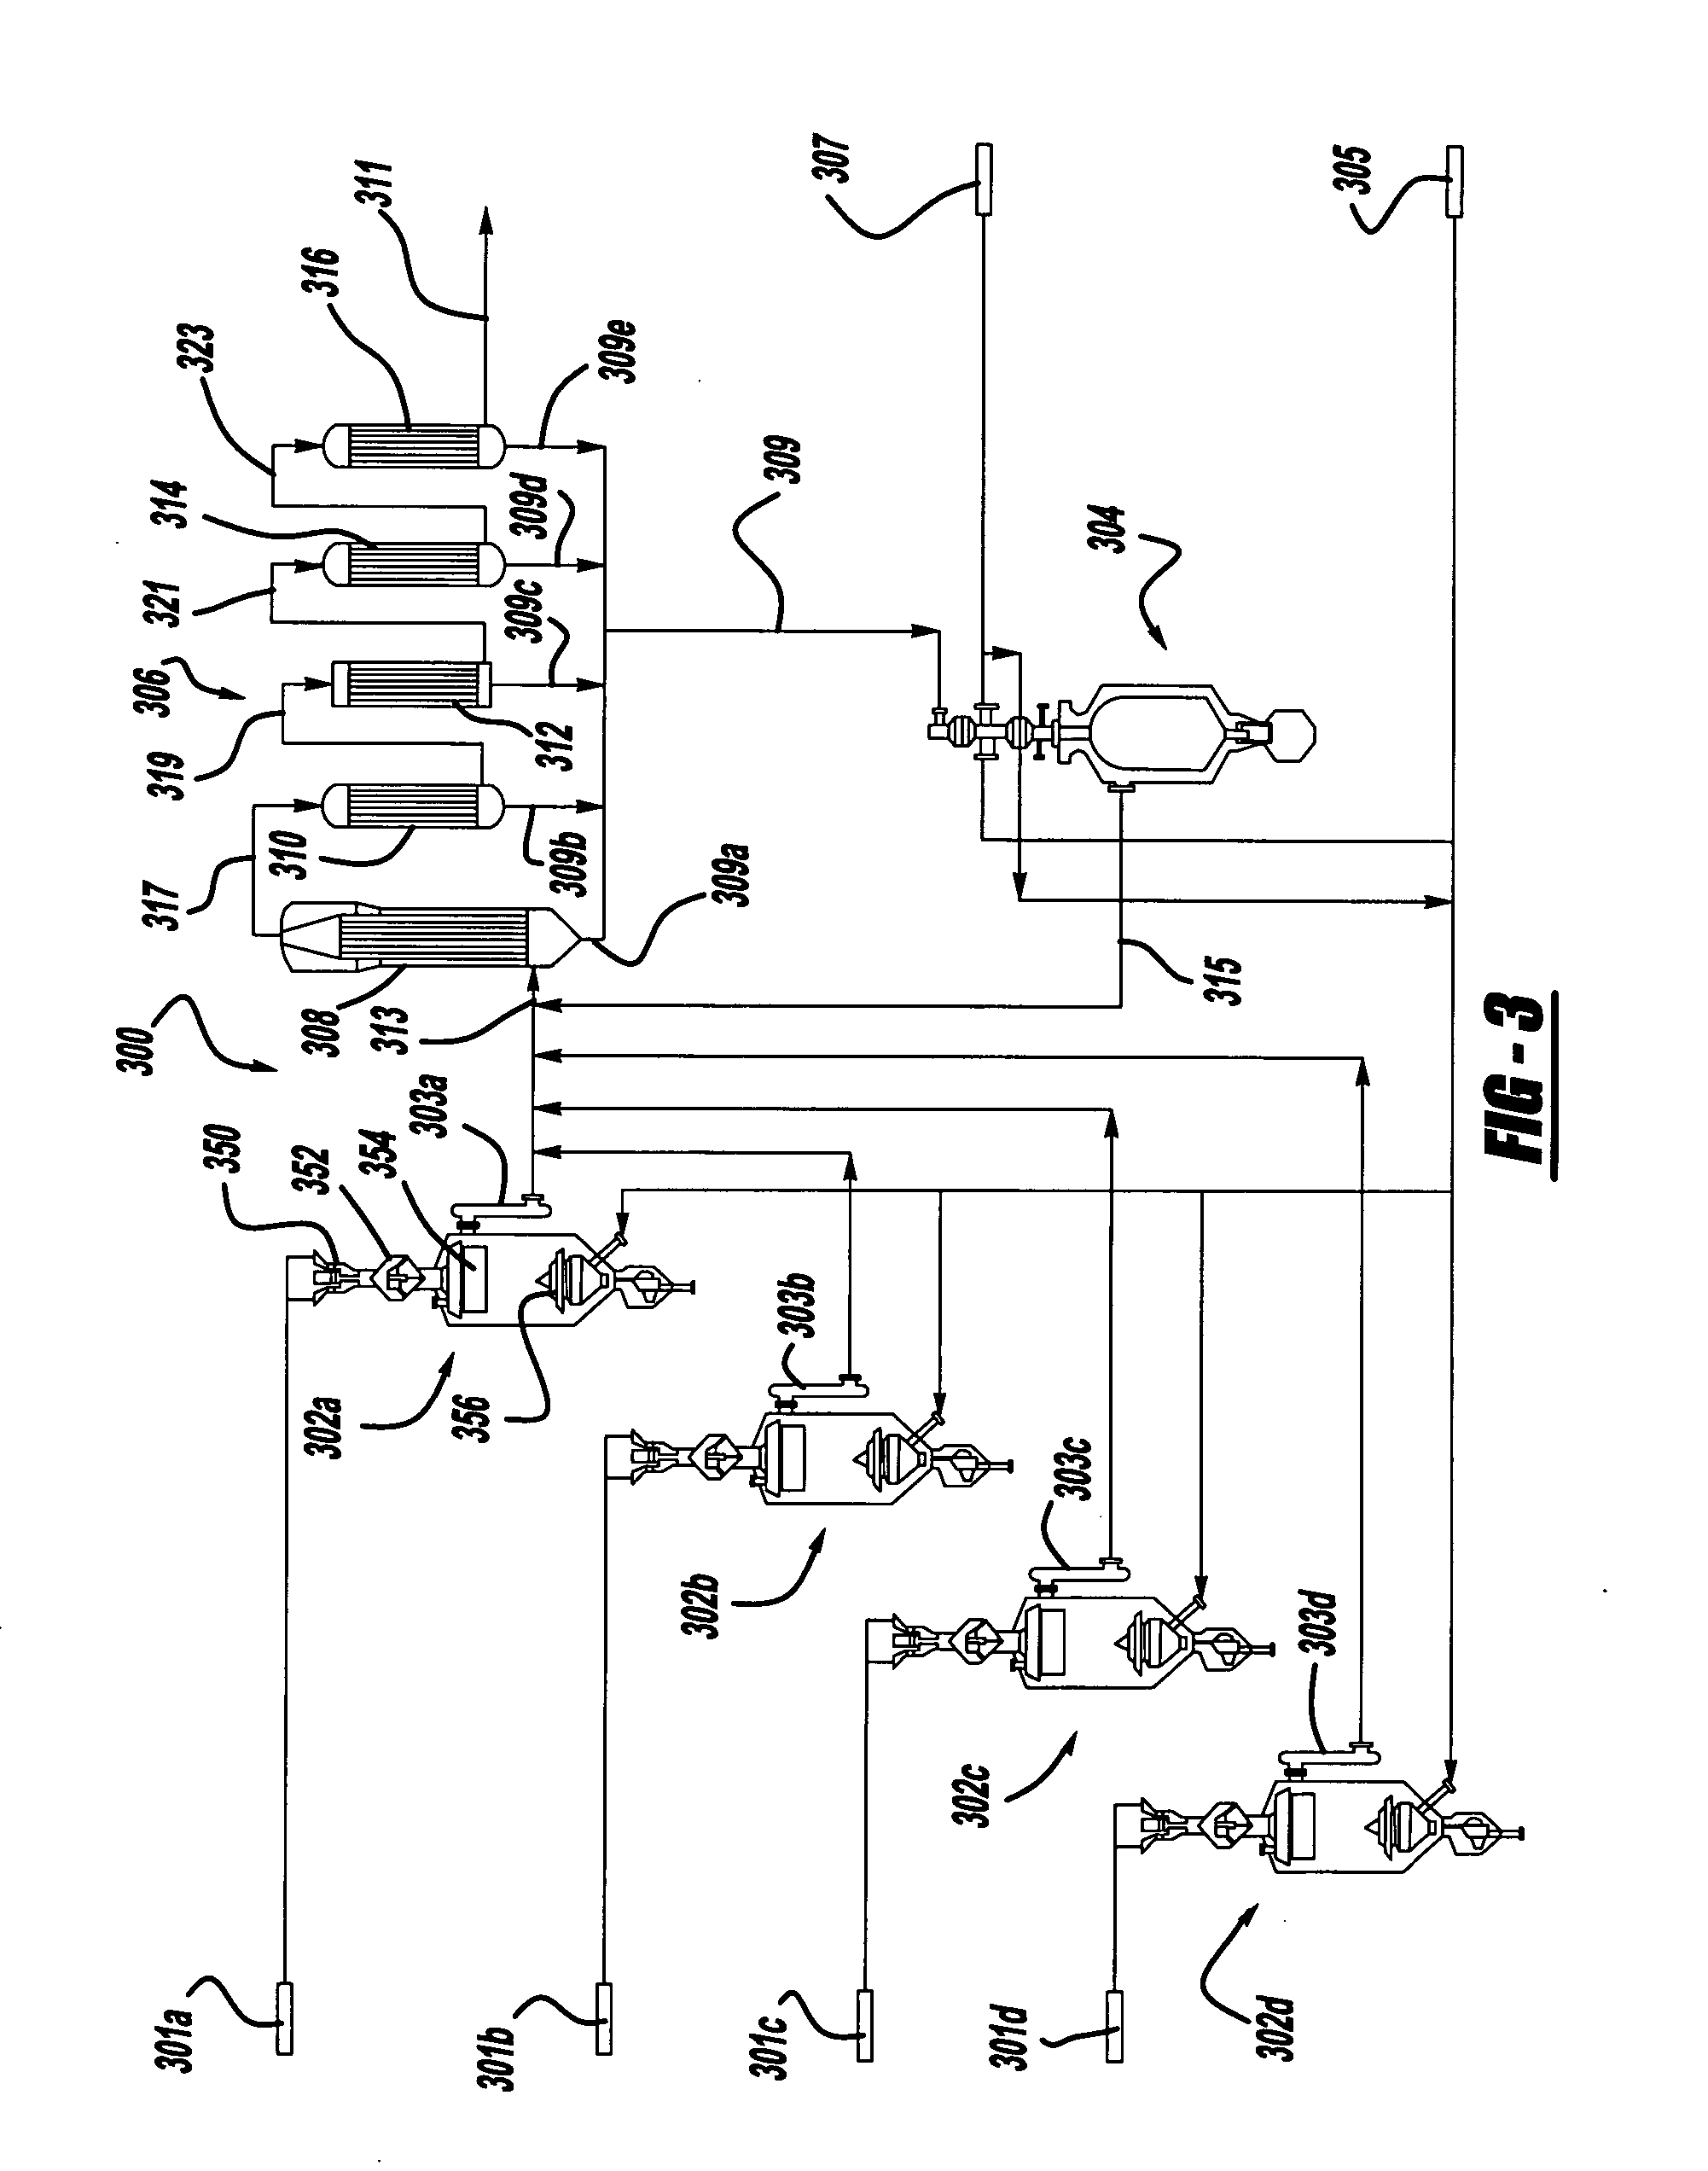 Apparatus and method for coal gasification